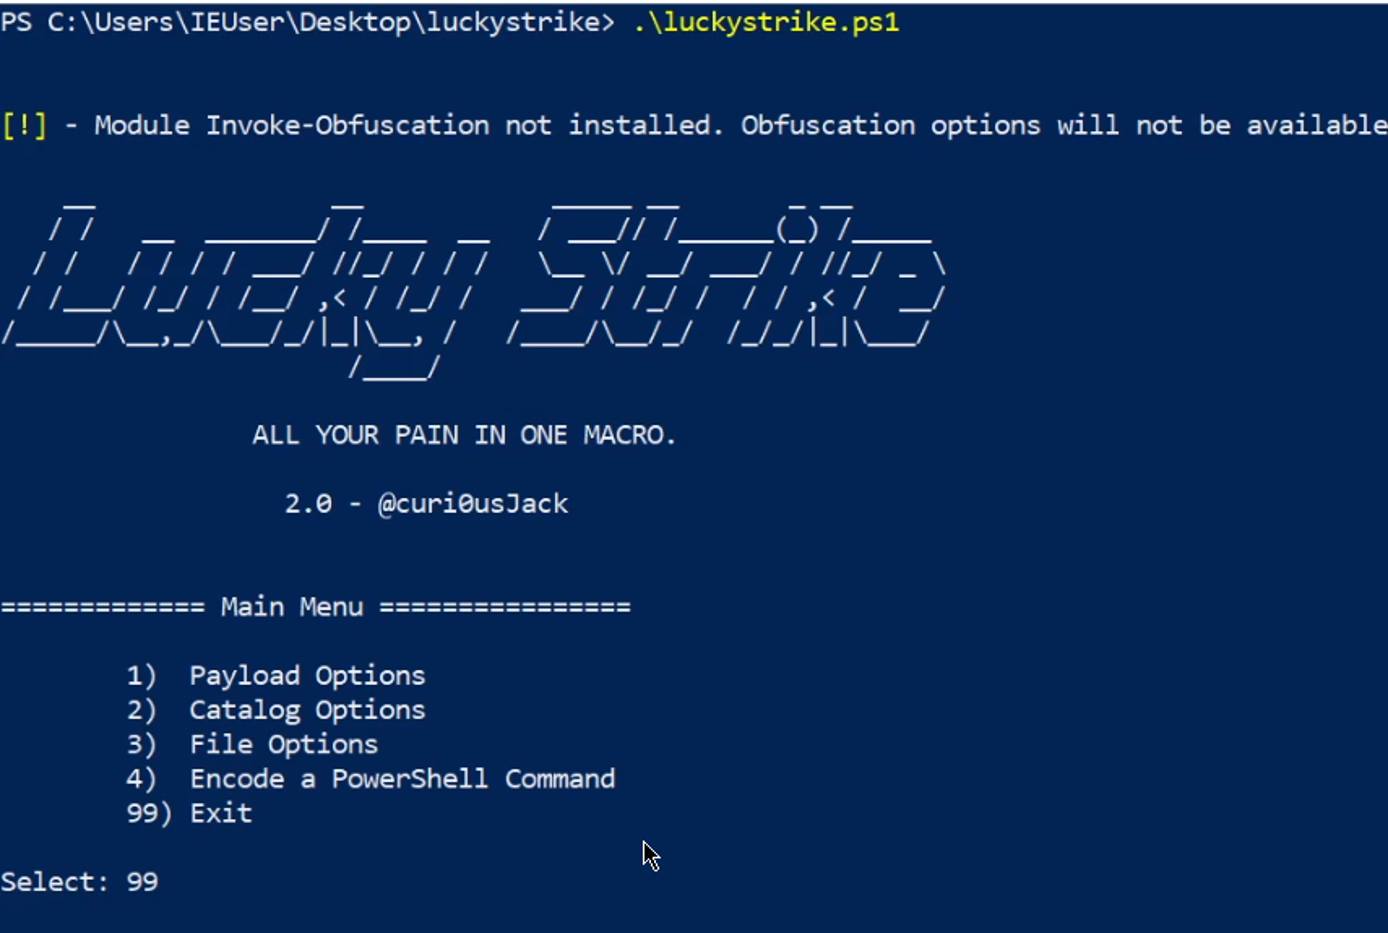 Luckystrike - first prompt shown in terminal